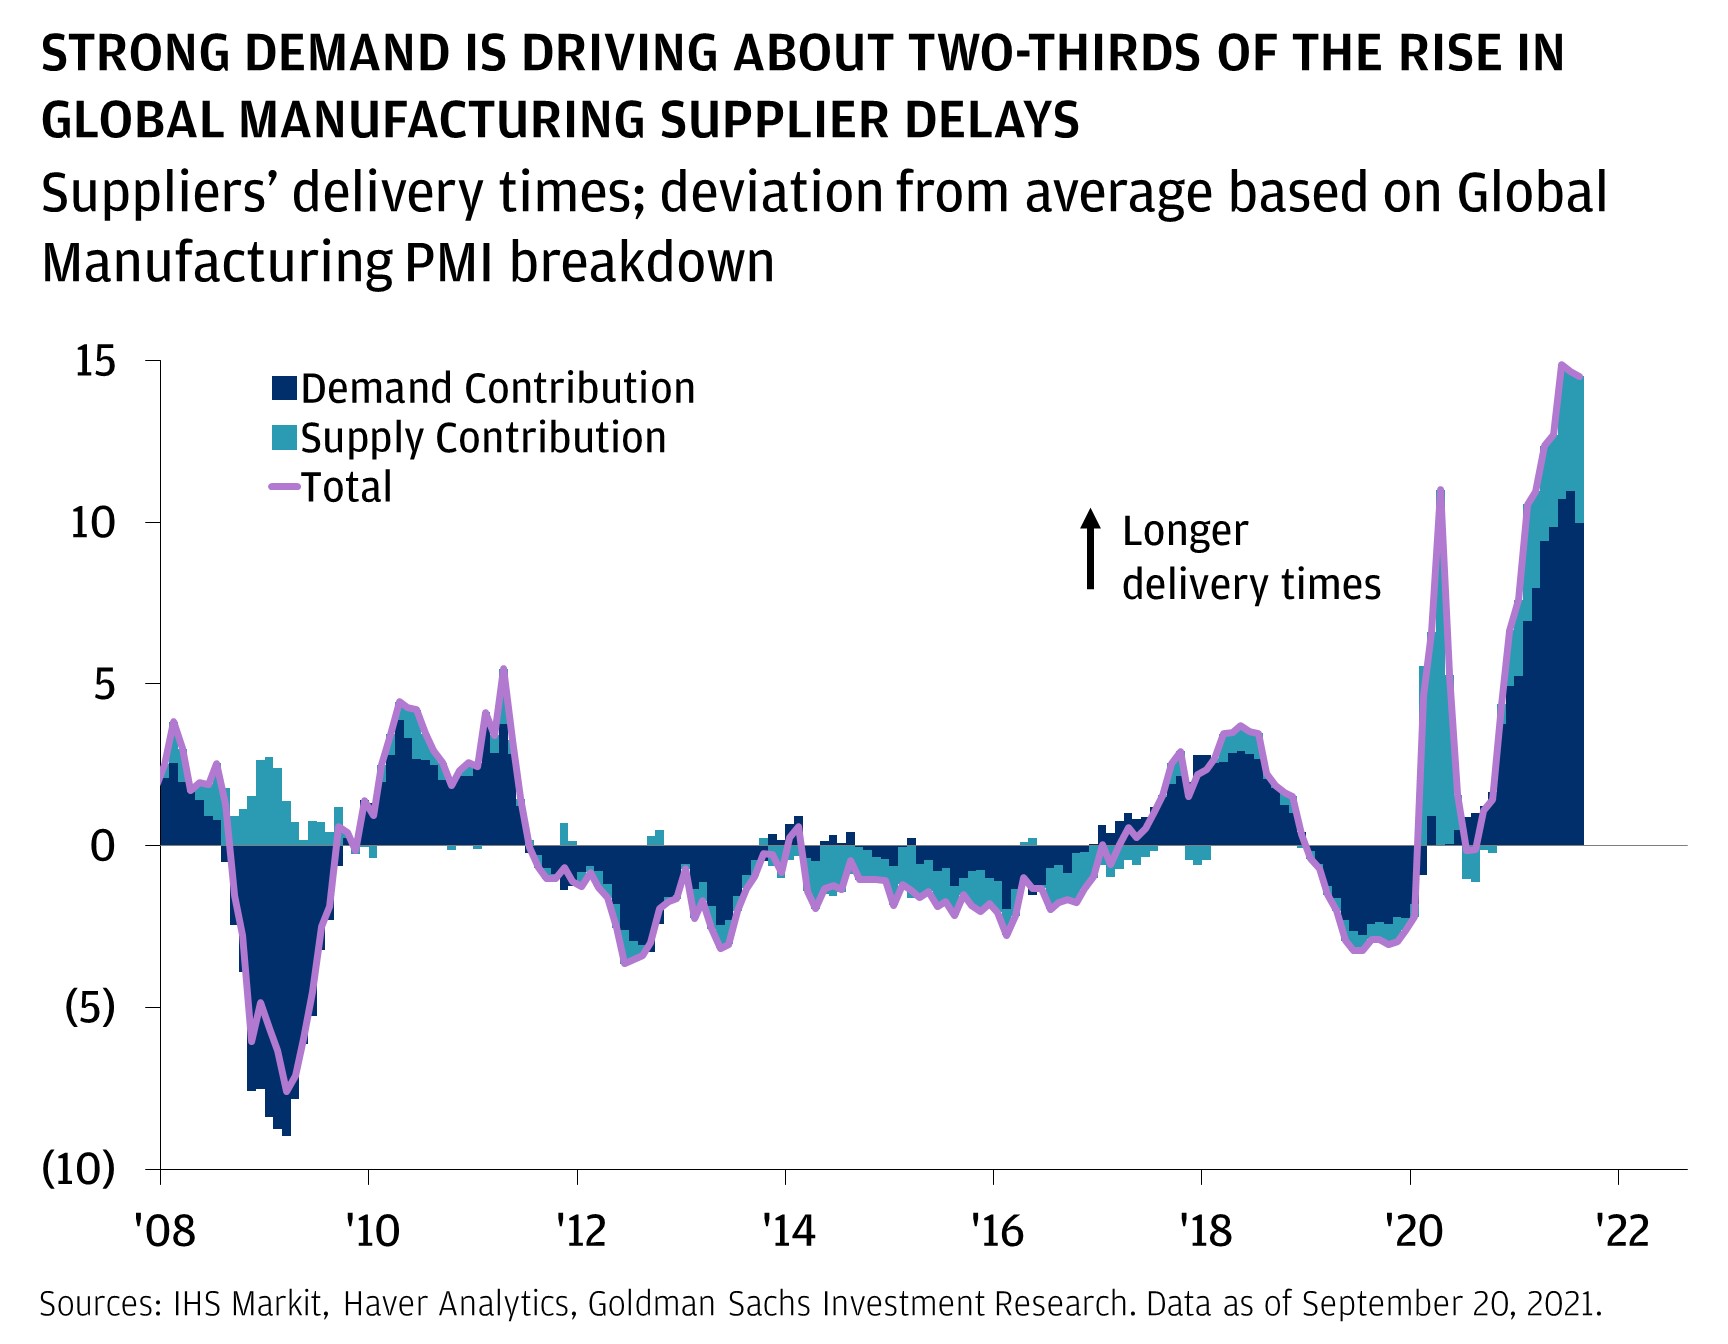 This chart shows how much supplier delivery times have deviated (in points of global Manufacturing PMI) from their long-term average, breaking out contributions from demand and supply, from December 2007 to August 2021.  The first data point comes in at 1.9 for total deviation, and sharply inclined to 3.8 by February 2008. From here, it briefly declined to 1.7, before rising to 2.6 and then sharply declining to a trough of -7.6 by March 2009. At that point, demand contribution was -8.9, while supply contribution was falling from +2.6 to +1.3. Total delivery time deviation then rose back to 4.4 by April 2010, with demand contributing 3.8 and supply 0.6. There was a brief decline in total deviation to 1.9 in October 2010 before we saw it rise back to 5.5 by April 2011, with demand contributing 3.7 and supply 1.7. Then there was a sharp decline to a trough of -3.7 by June 2012, with -2.6 coming from demand’s contribution and -1.1 coming from supply. From there, total deviation increased to -0.7 by January 2013 before dropping once again to -3.2 by May 2013, with demand contribution -2.5 and supply contribution -0.7.  In February 2014, the deviation reached 0.6 before dropping to -2.0 by April 2014, with demand’s contribution only -0.5 and supply’s -1.5. Supply continued to weigh more on the negative deviation from April 2014 until February 2016, at which point the total of -2.8 came from a -2.0 contribution from demand and -0.8 contribution from supply. Then total deviation rose a bit, but stayed in negative territory before dropping again to -1.8 by October 2016 (with -0.2 from demand and -1.6 from supply).  From there, delivery time’s deviation from the average gradually rose back to positive and landed at 3.7 in May 2018, as demand contribution reached to 2.9 and supply contribution 0.8. Then there was a relatively sharp decline in the total to a trough of -3.2 by July 2019 (with-2.6 from demand contribution and -0.6 from supply). Then total deviation remain